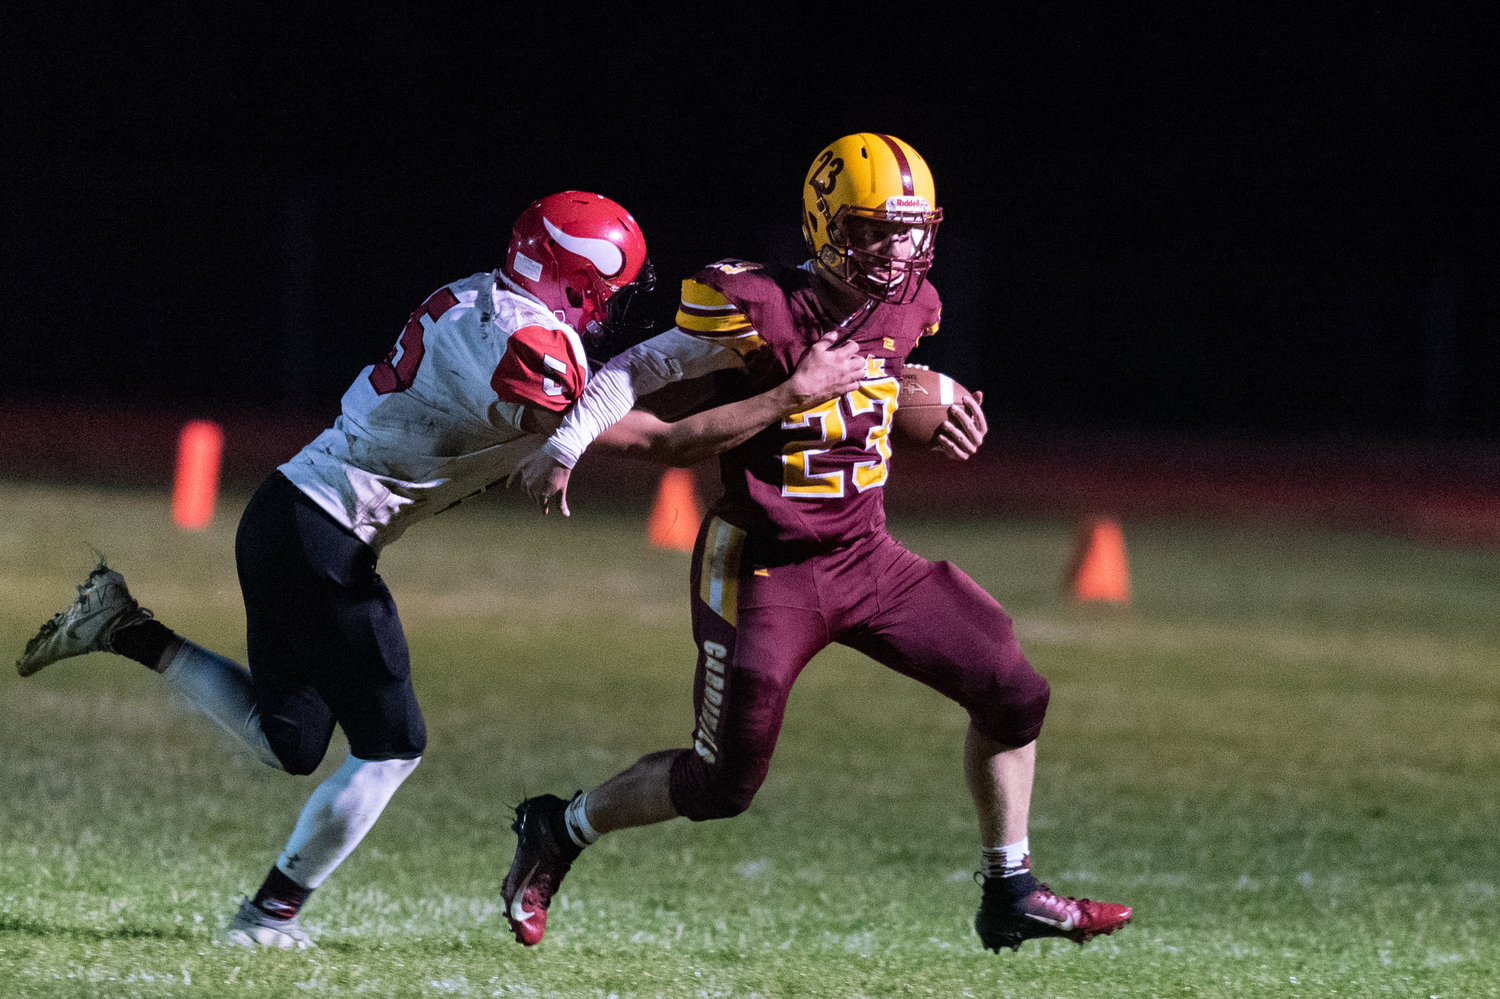 FILE PHOTO -- Winlock quarterback Neal Patching powers through a tackle in the Cardinals win over Mossyrock Oct. 8.